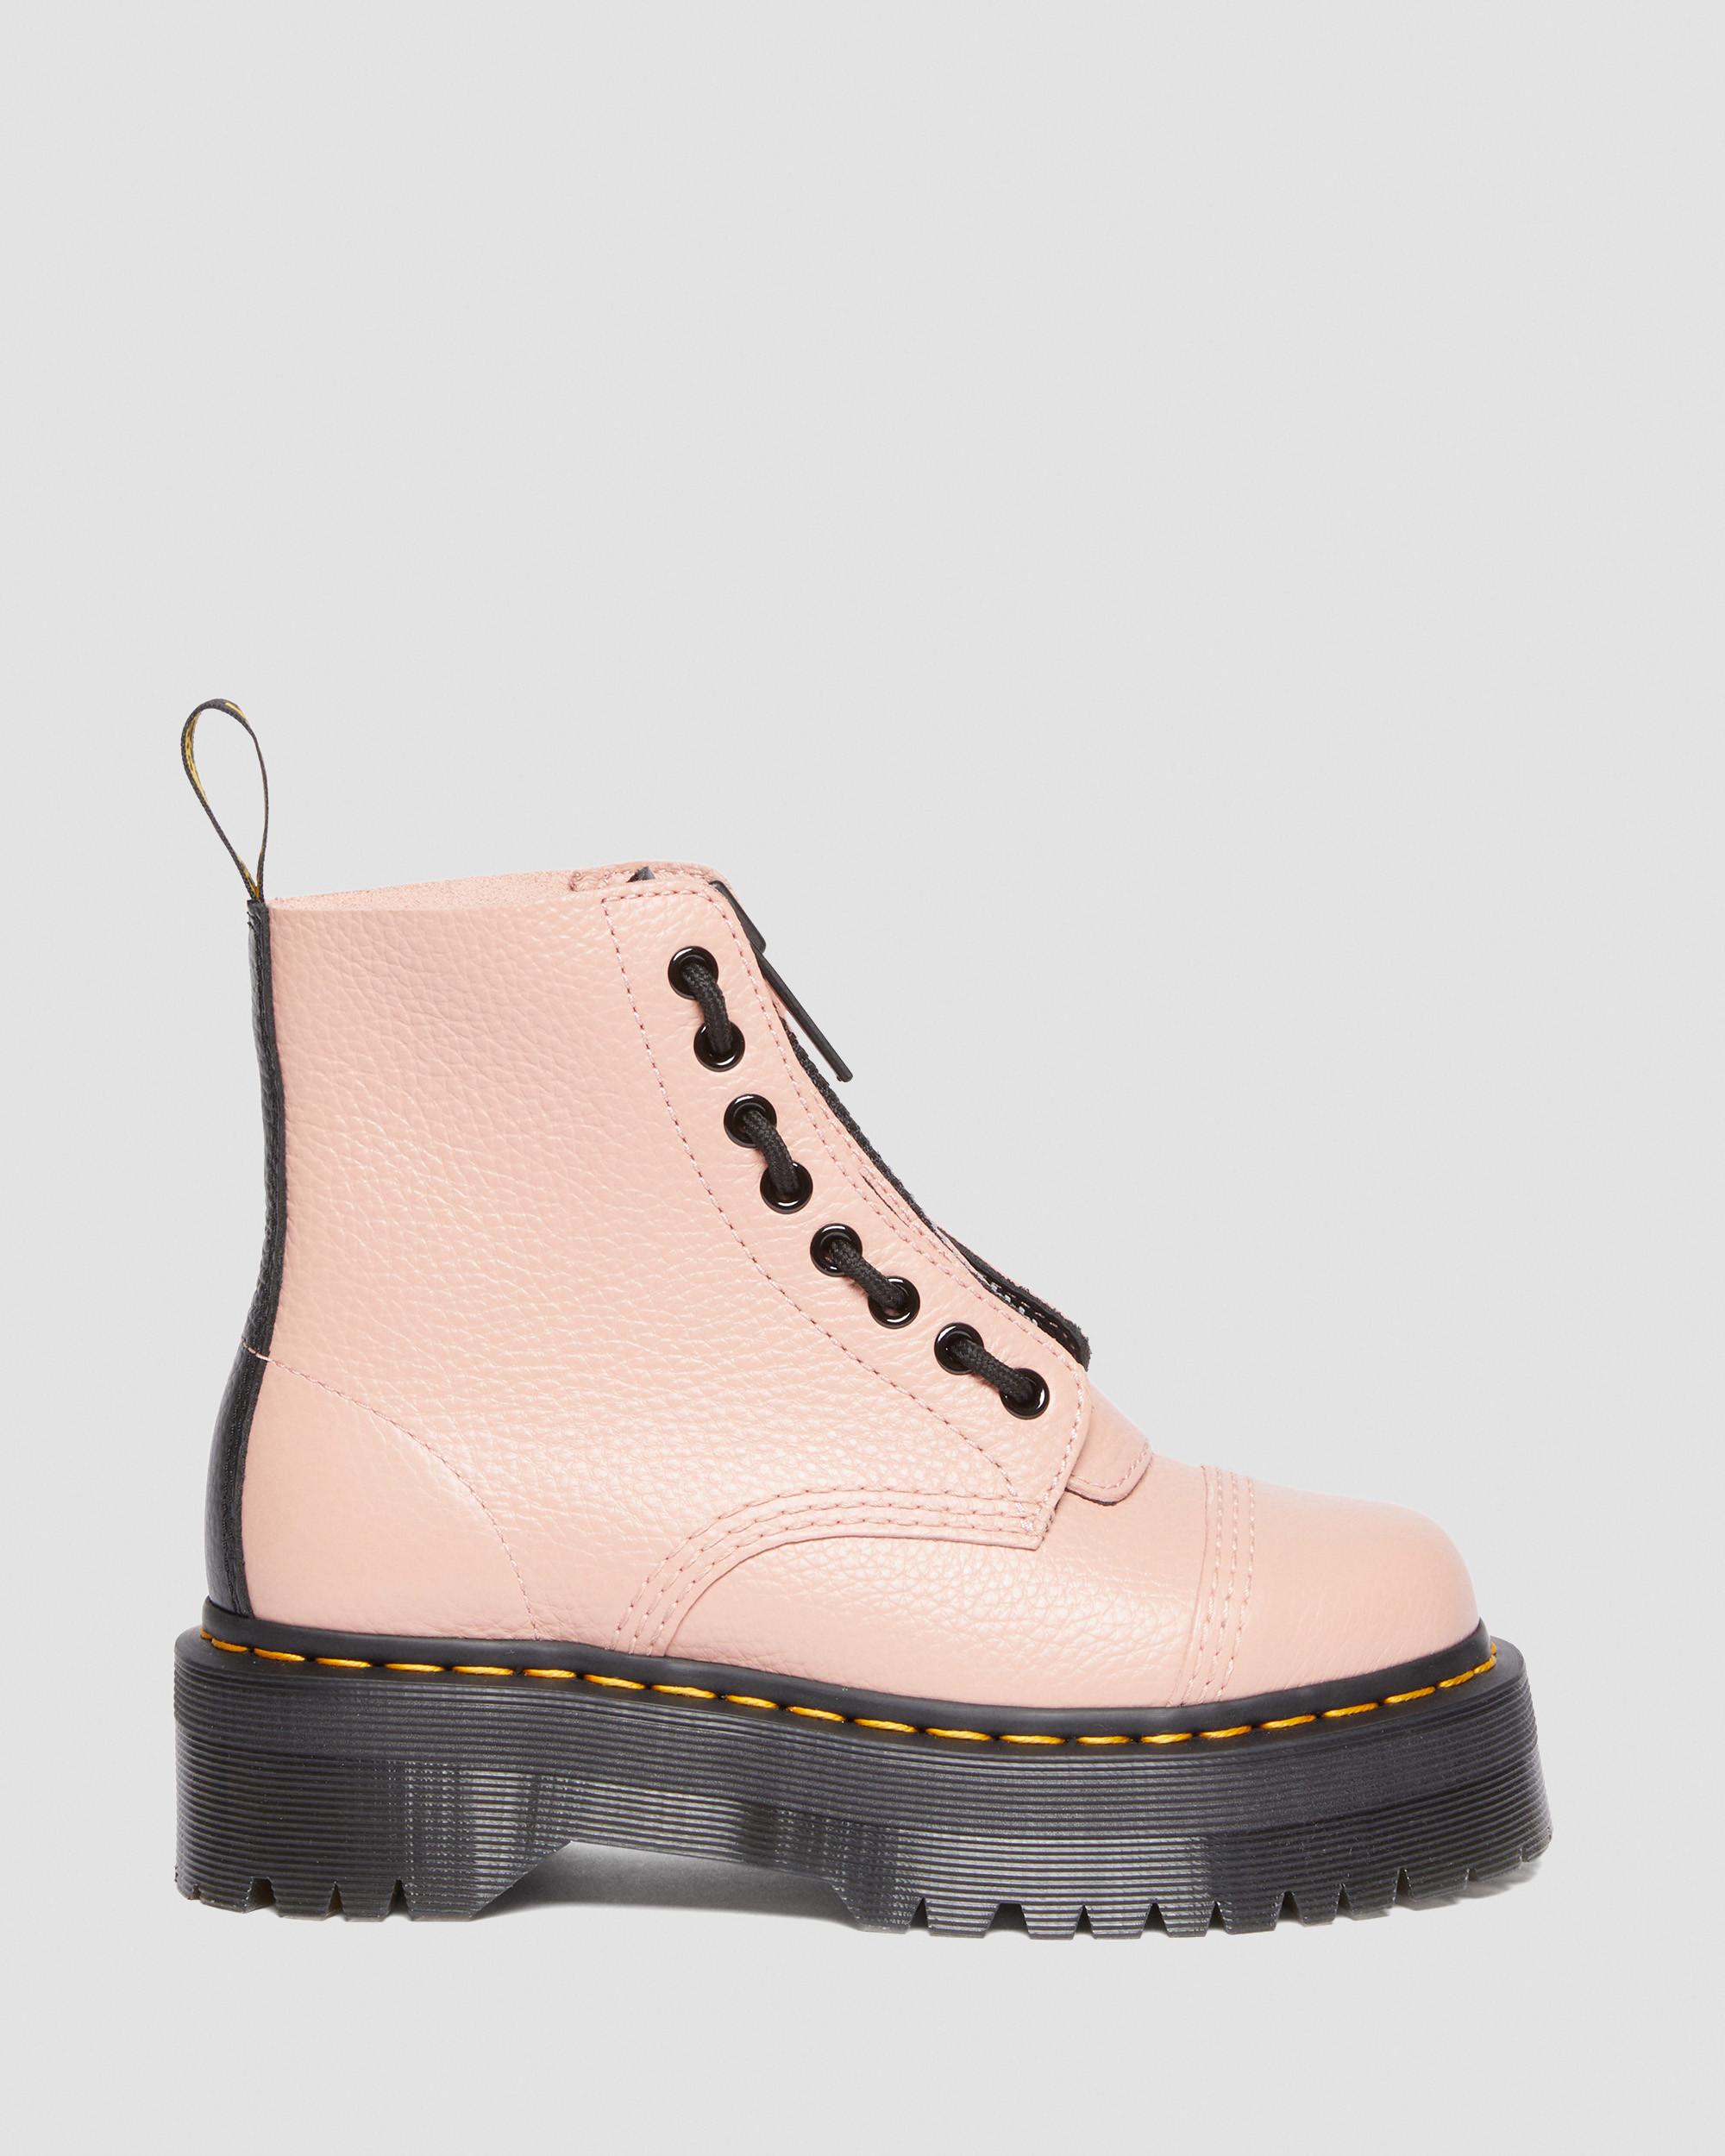 Sinclair Milled Nappa Leather Platform Boots in Peach Beige | Dr. Martens